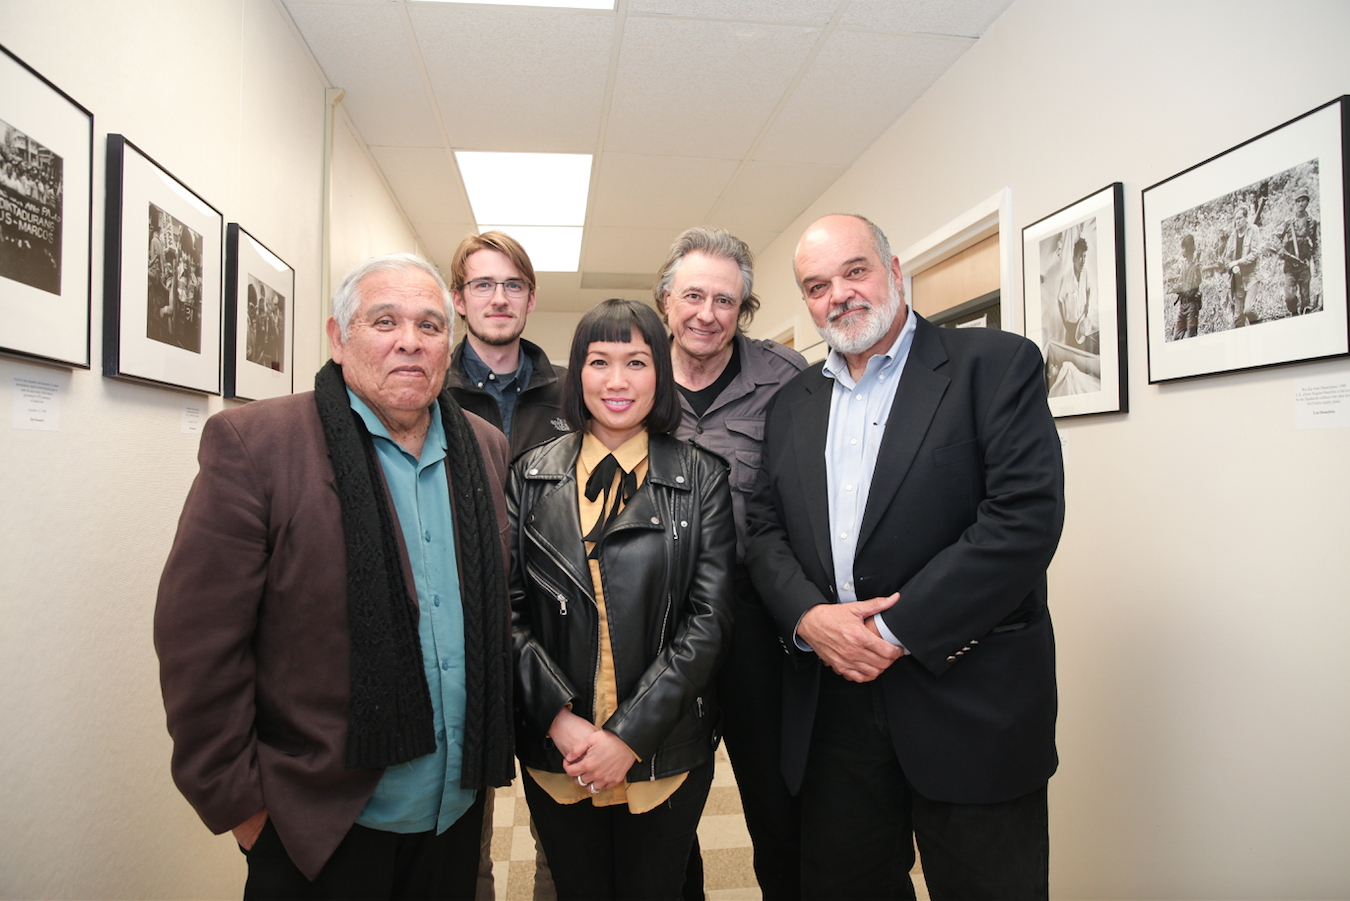 Journalism department chair Juan Gonzales, curator James Fanucchi, curator Ekevara Kitpowsong, former Reuters Photo Bureau Chief Lou Dematteis, and Pulitzer Prize-winning photojournalists Kim Komenich at the opening reception of "In the Line of Fire" on Friday, April 13, 2018. Photo by David Horowitz/Special to The Guardsman. 